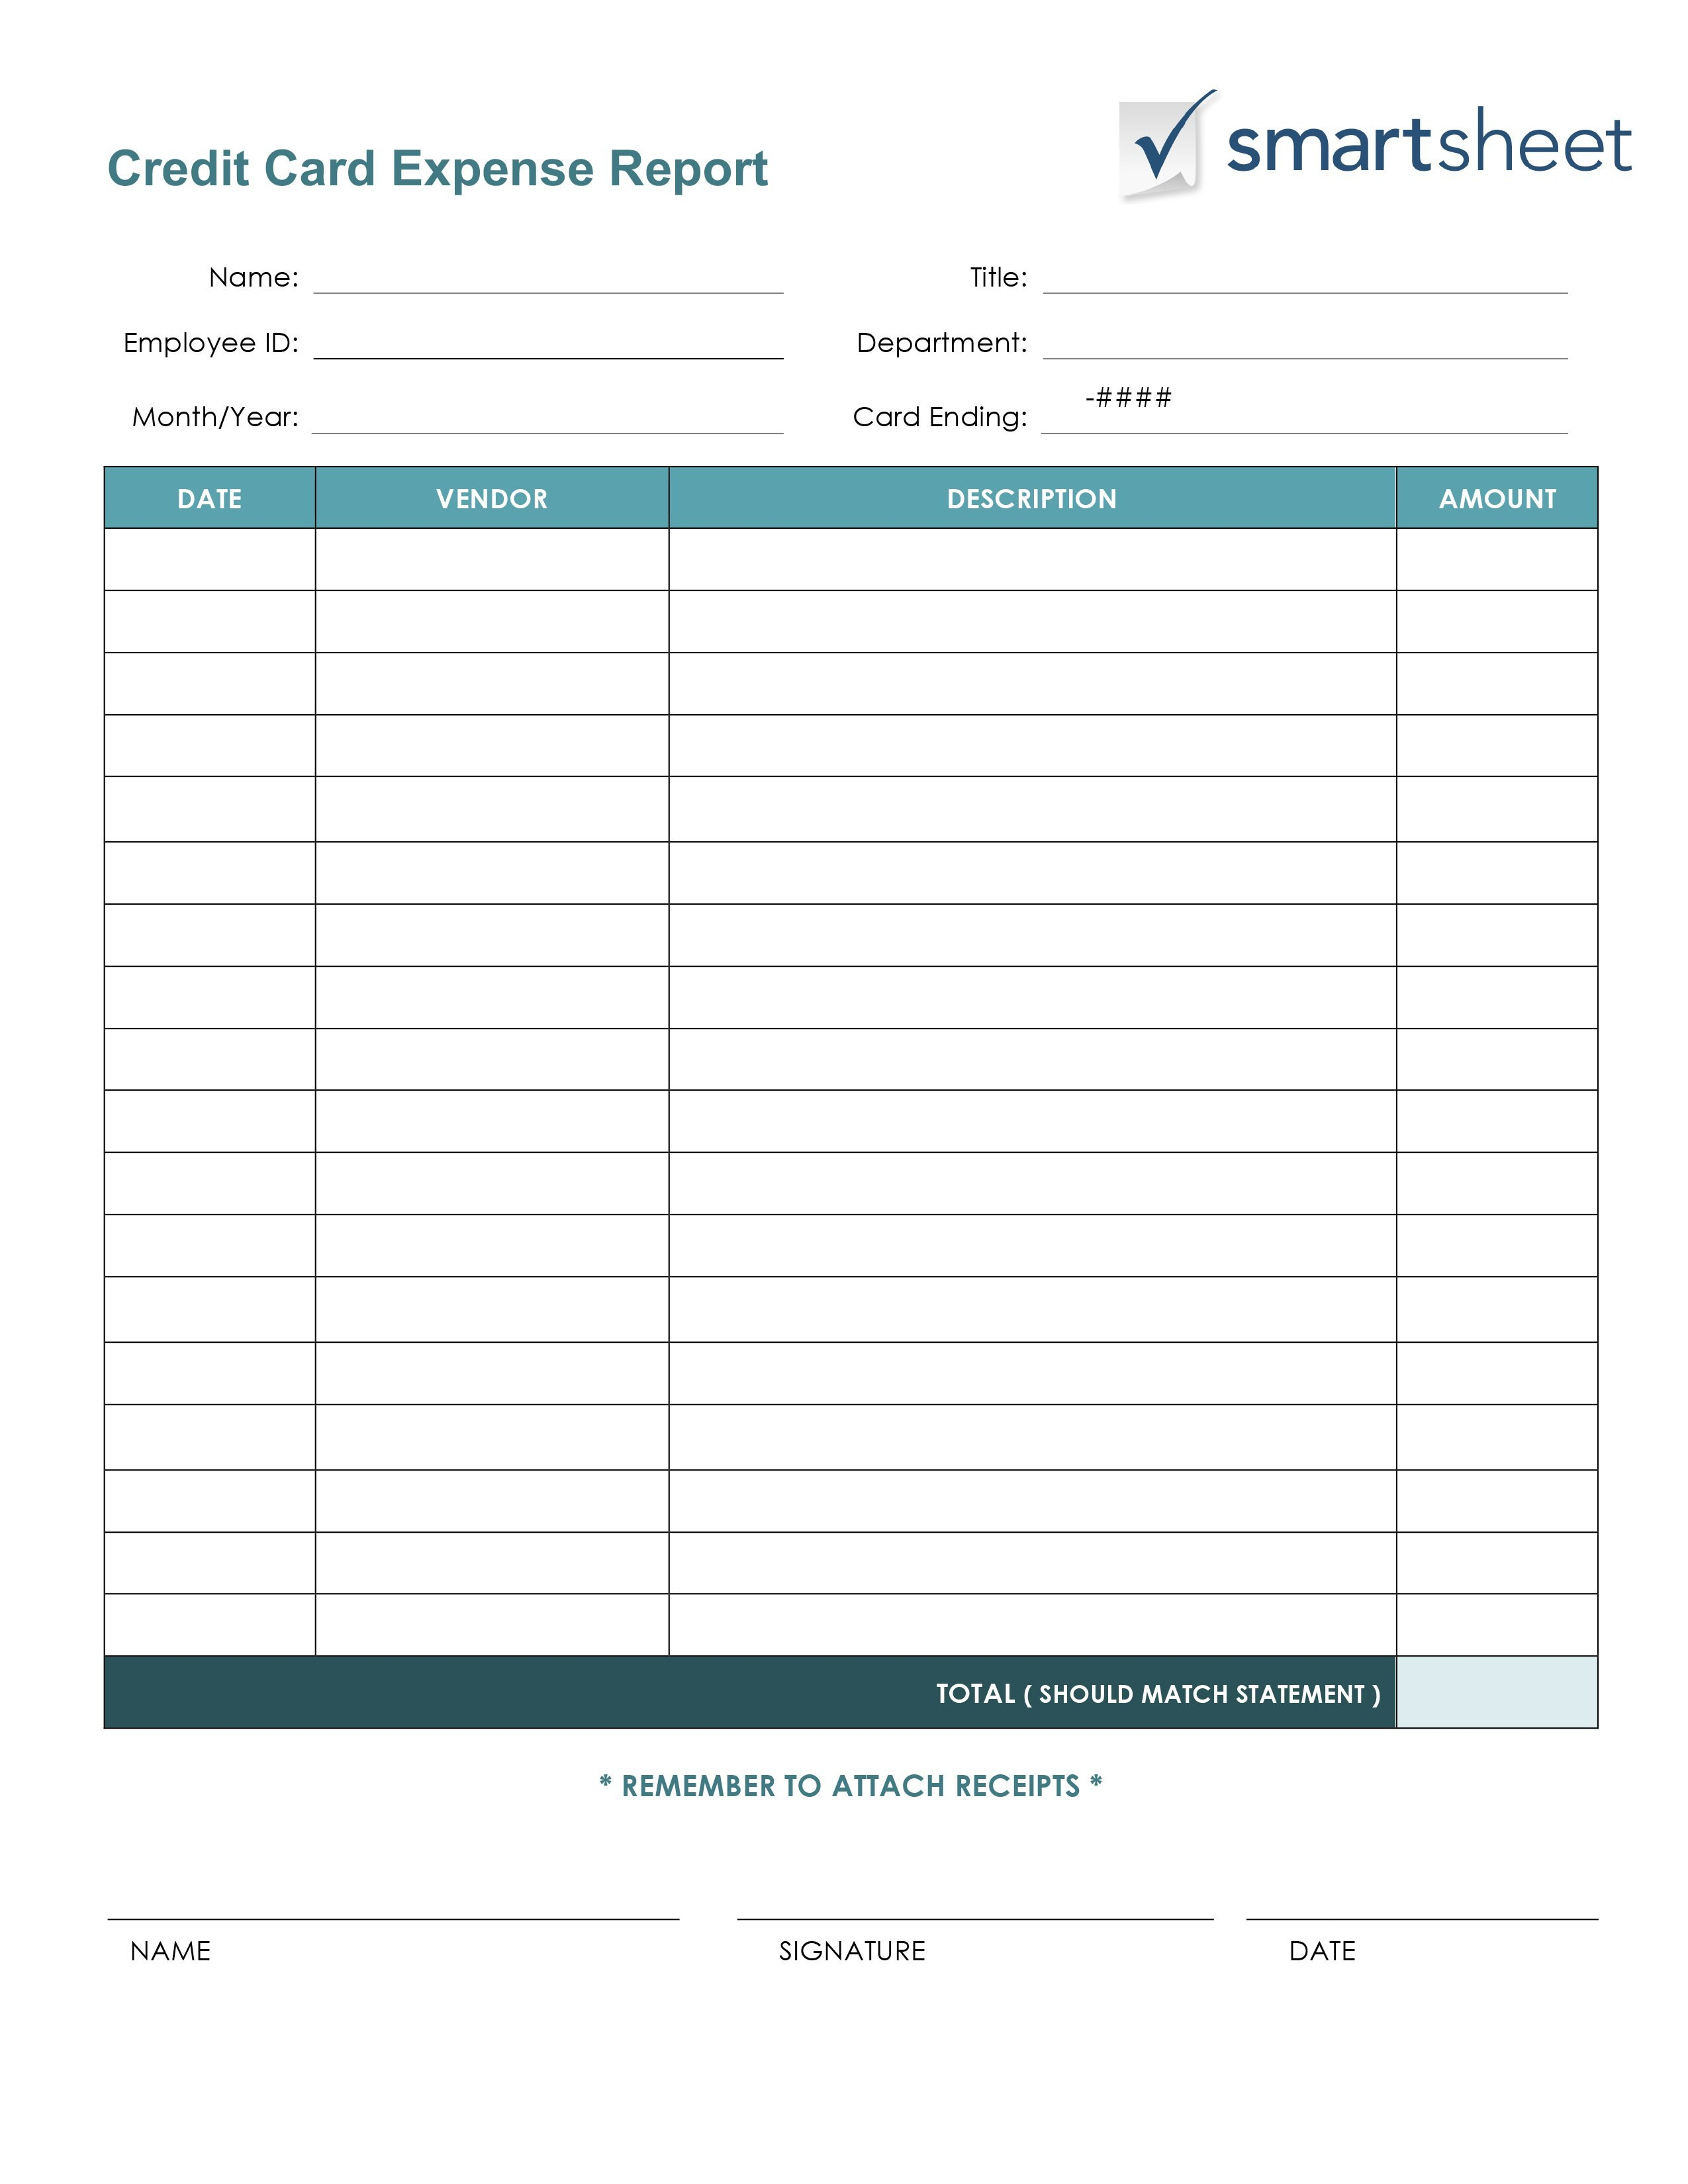 Fake Report Card Template Ideas Ic Creditcardexpensereport Word throughout Fake Report Card Template